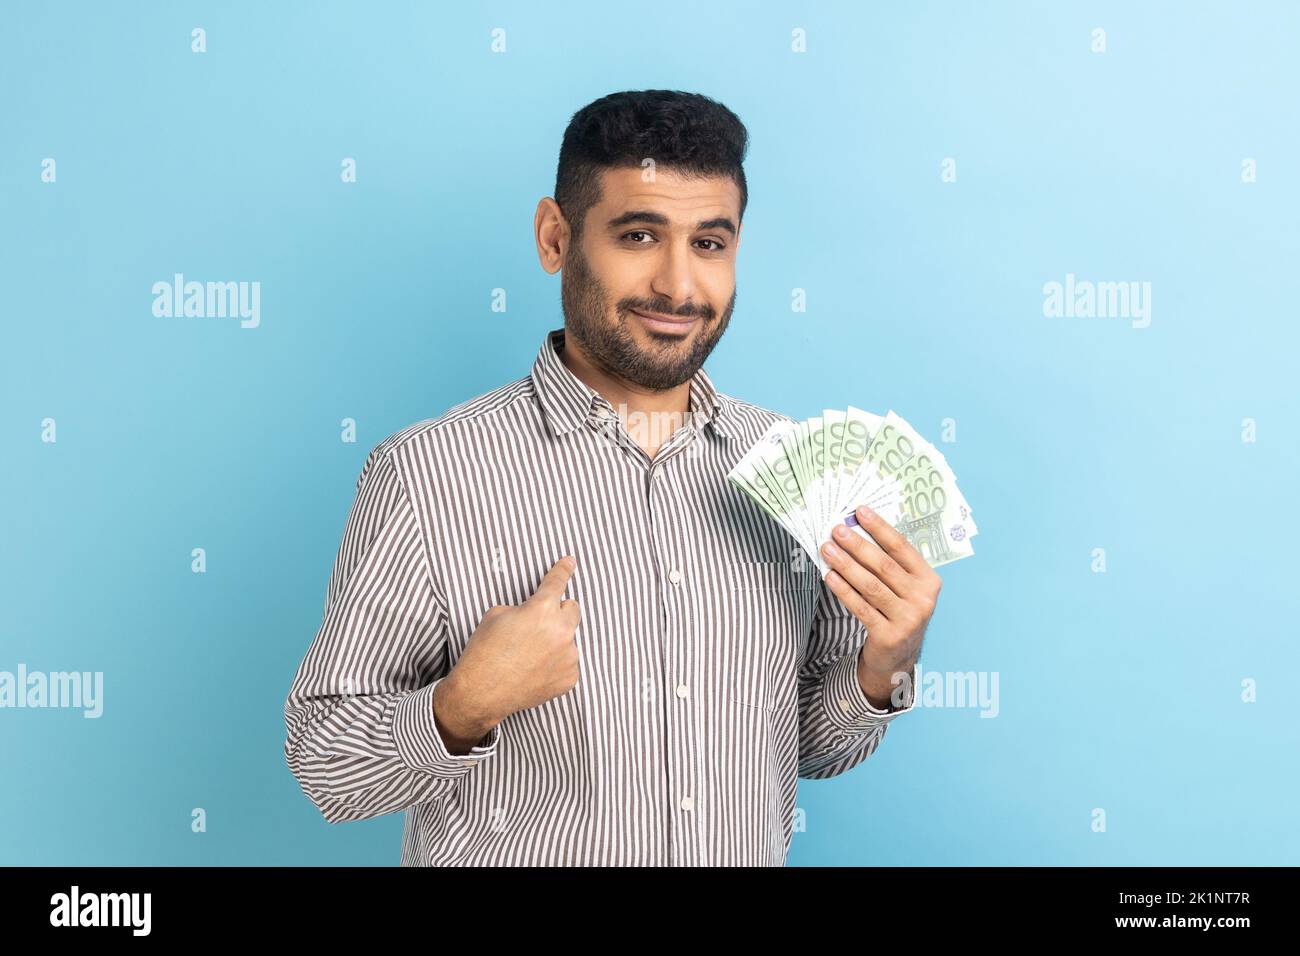 Portrait of young adult businessman with beard holding euro bills and pointing at himself with pride, looking at camera, wearing striped shirt. Indoor studio shot isolated on blue background. Stock Photo